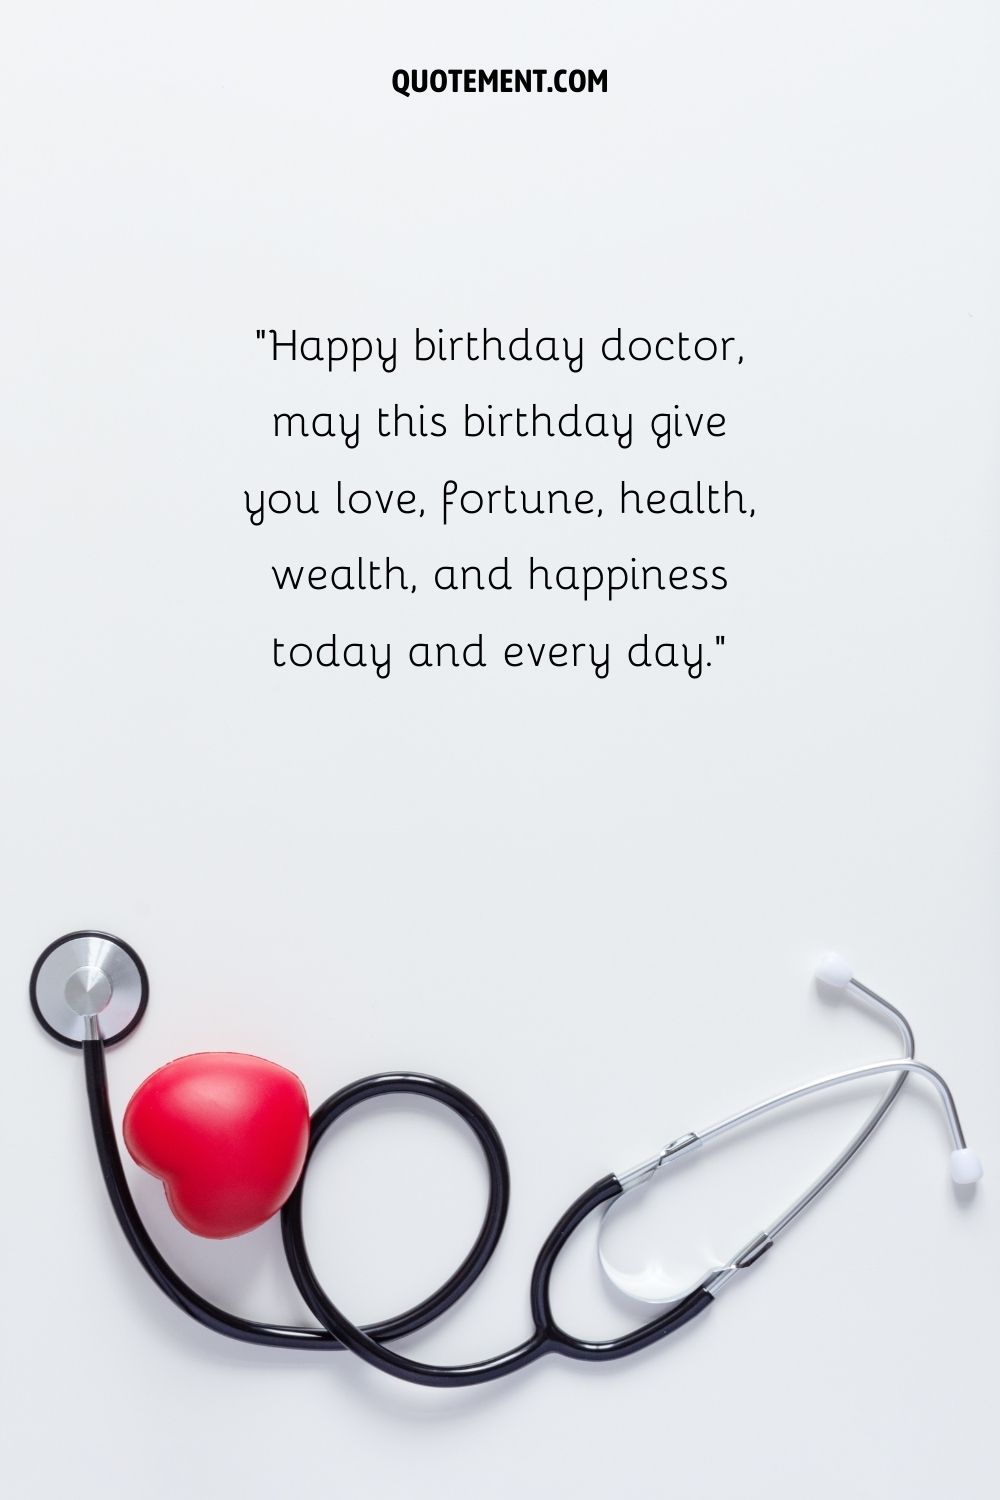 black stethoscope curled up representing birthday wishes for dr